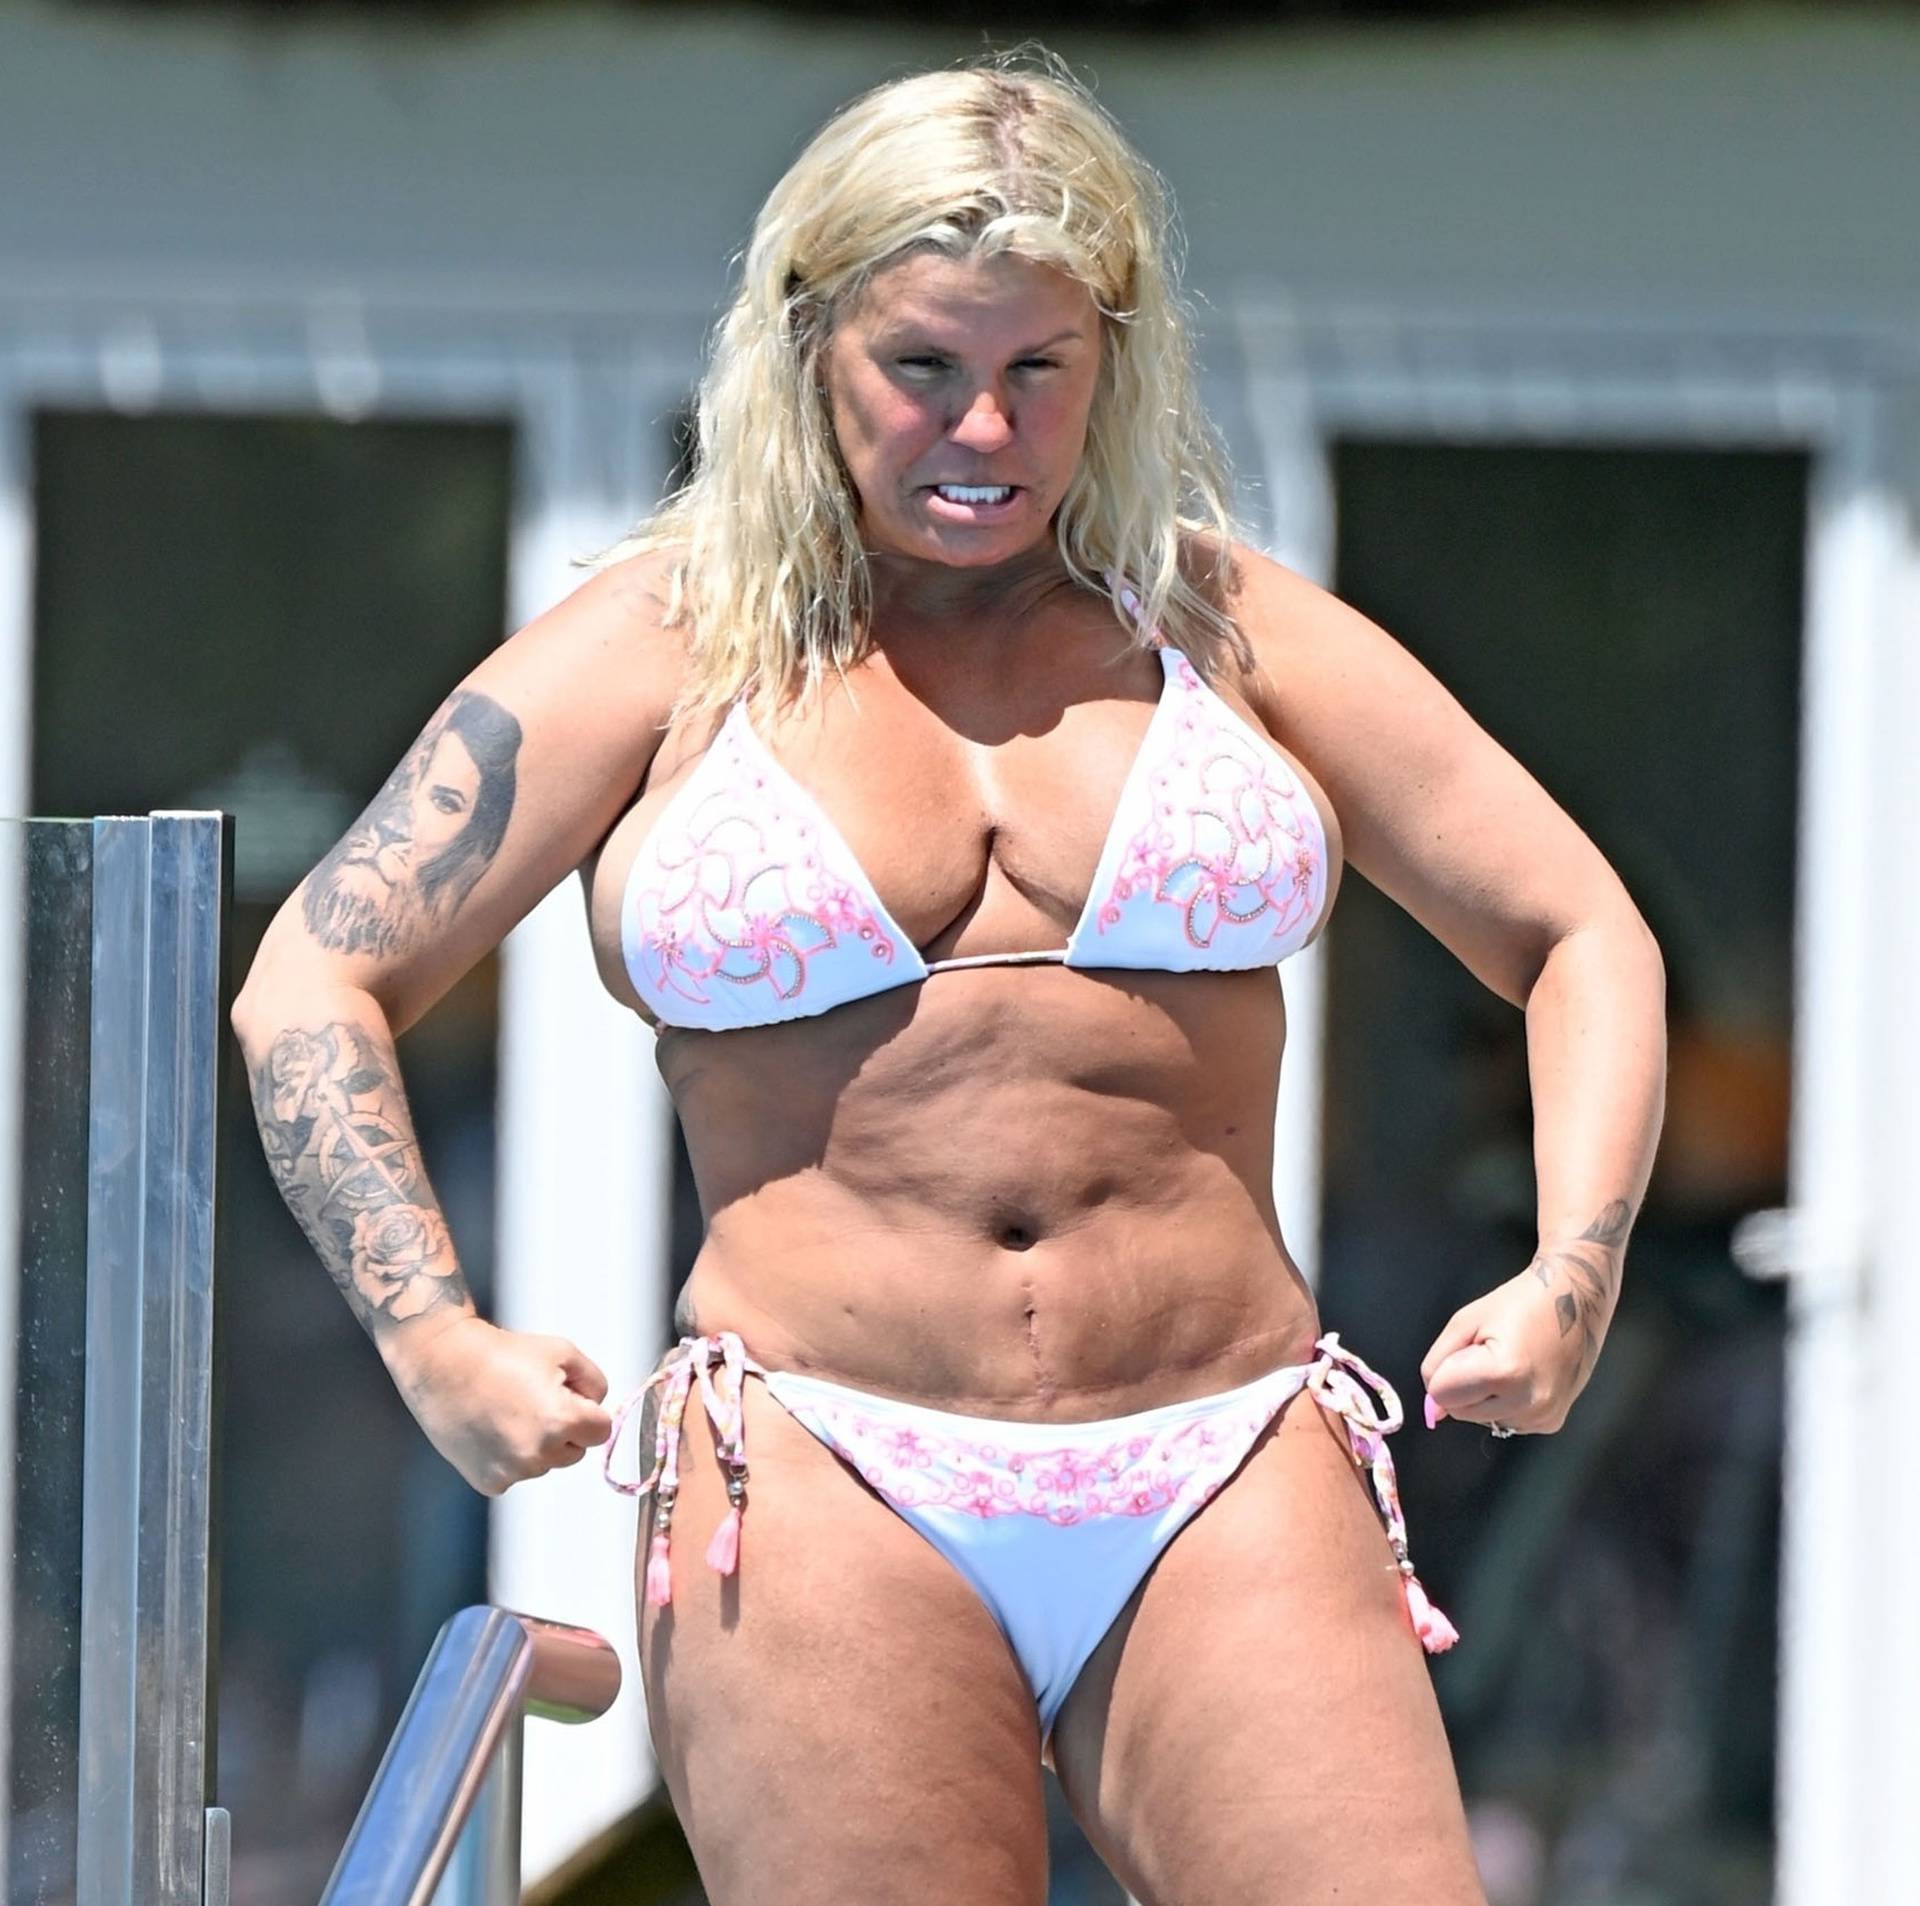 *PREMIUM-EXCLUSIVE* MUST CALL FOR PRICING BEFORE USAGE  - The former Atomic Kitten star Kerry Katona with her beau Ryan Mahoney enjoy a little fun in the sun during their holidays out in Spain.
*PICTURES TAKEN ON 02/06/2023*